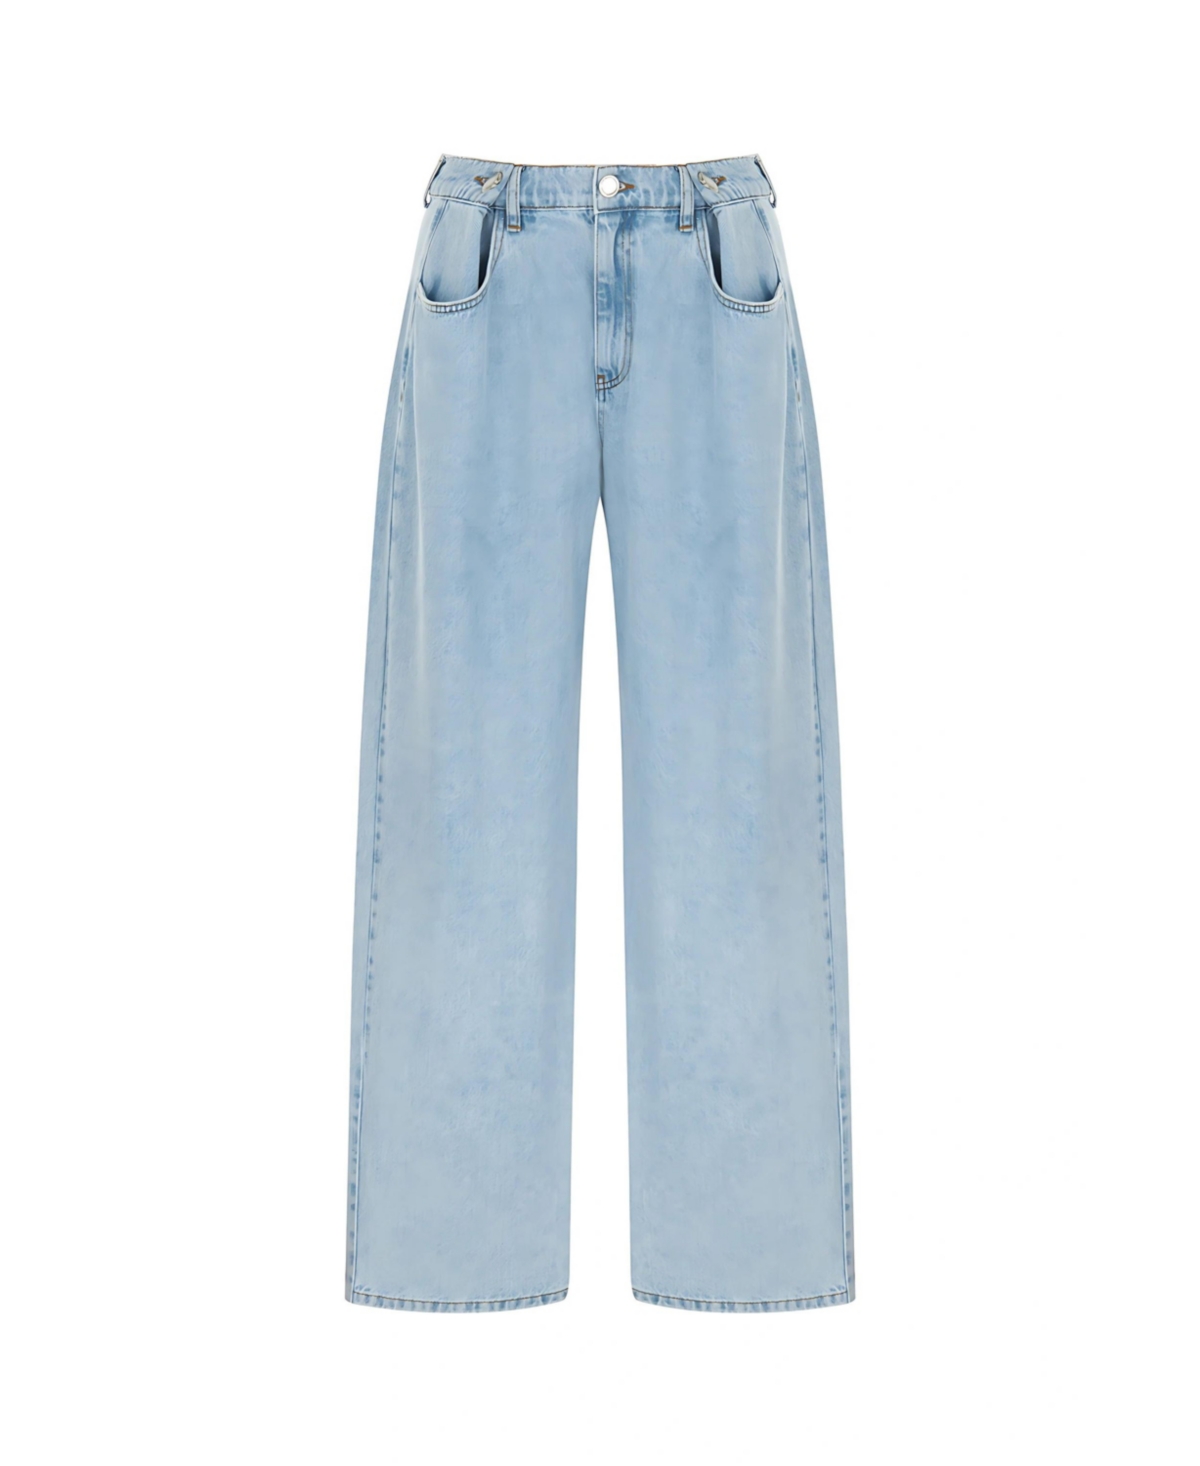 Women's Contrast Jeans with Pockets - Blue